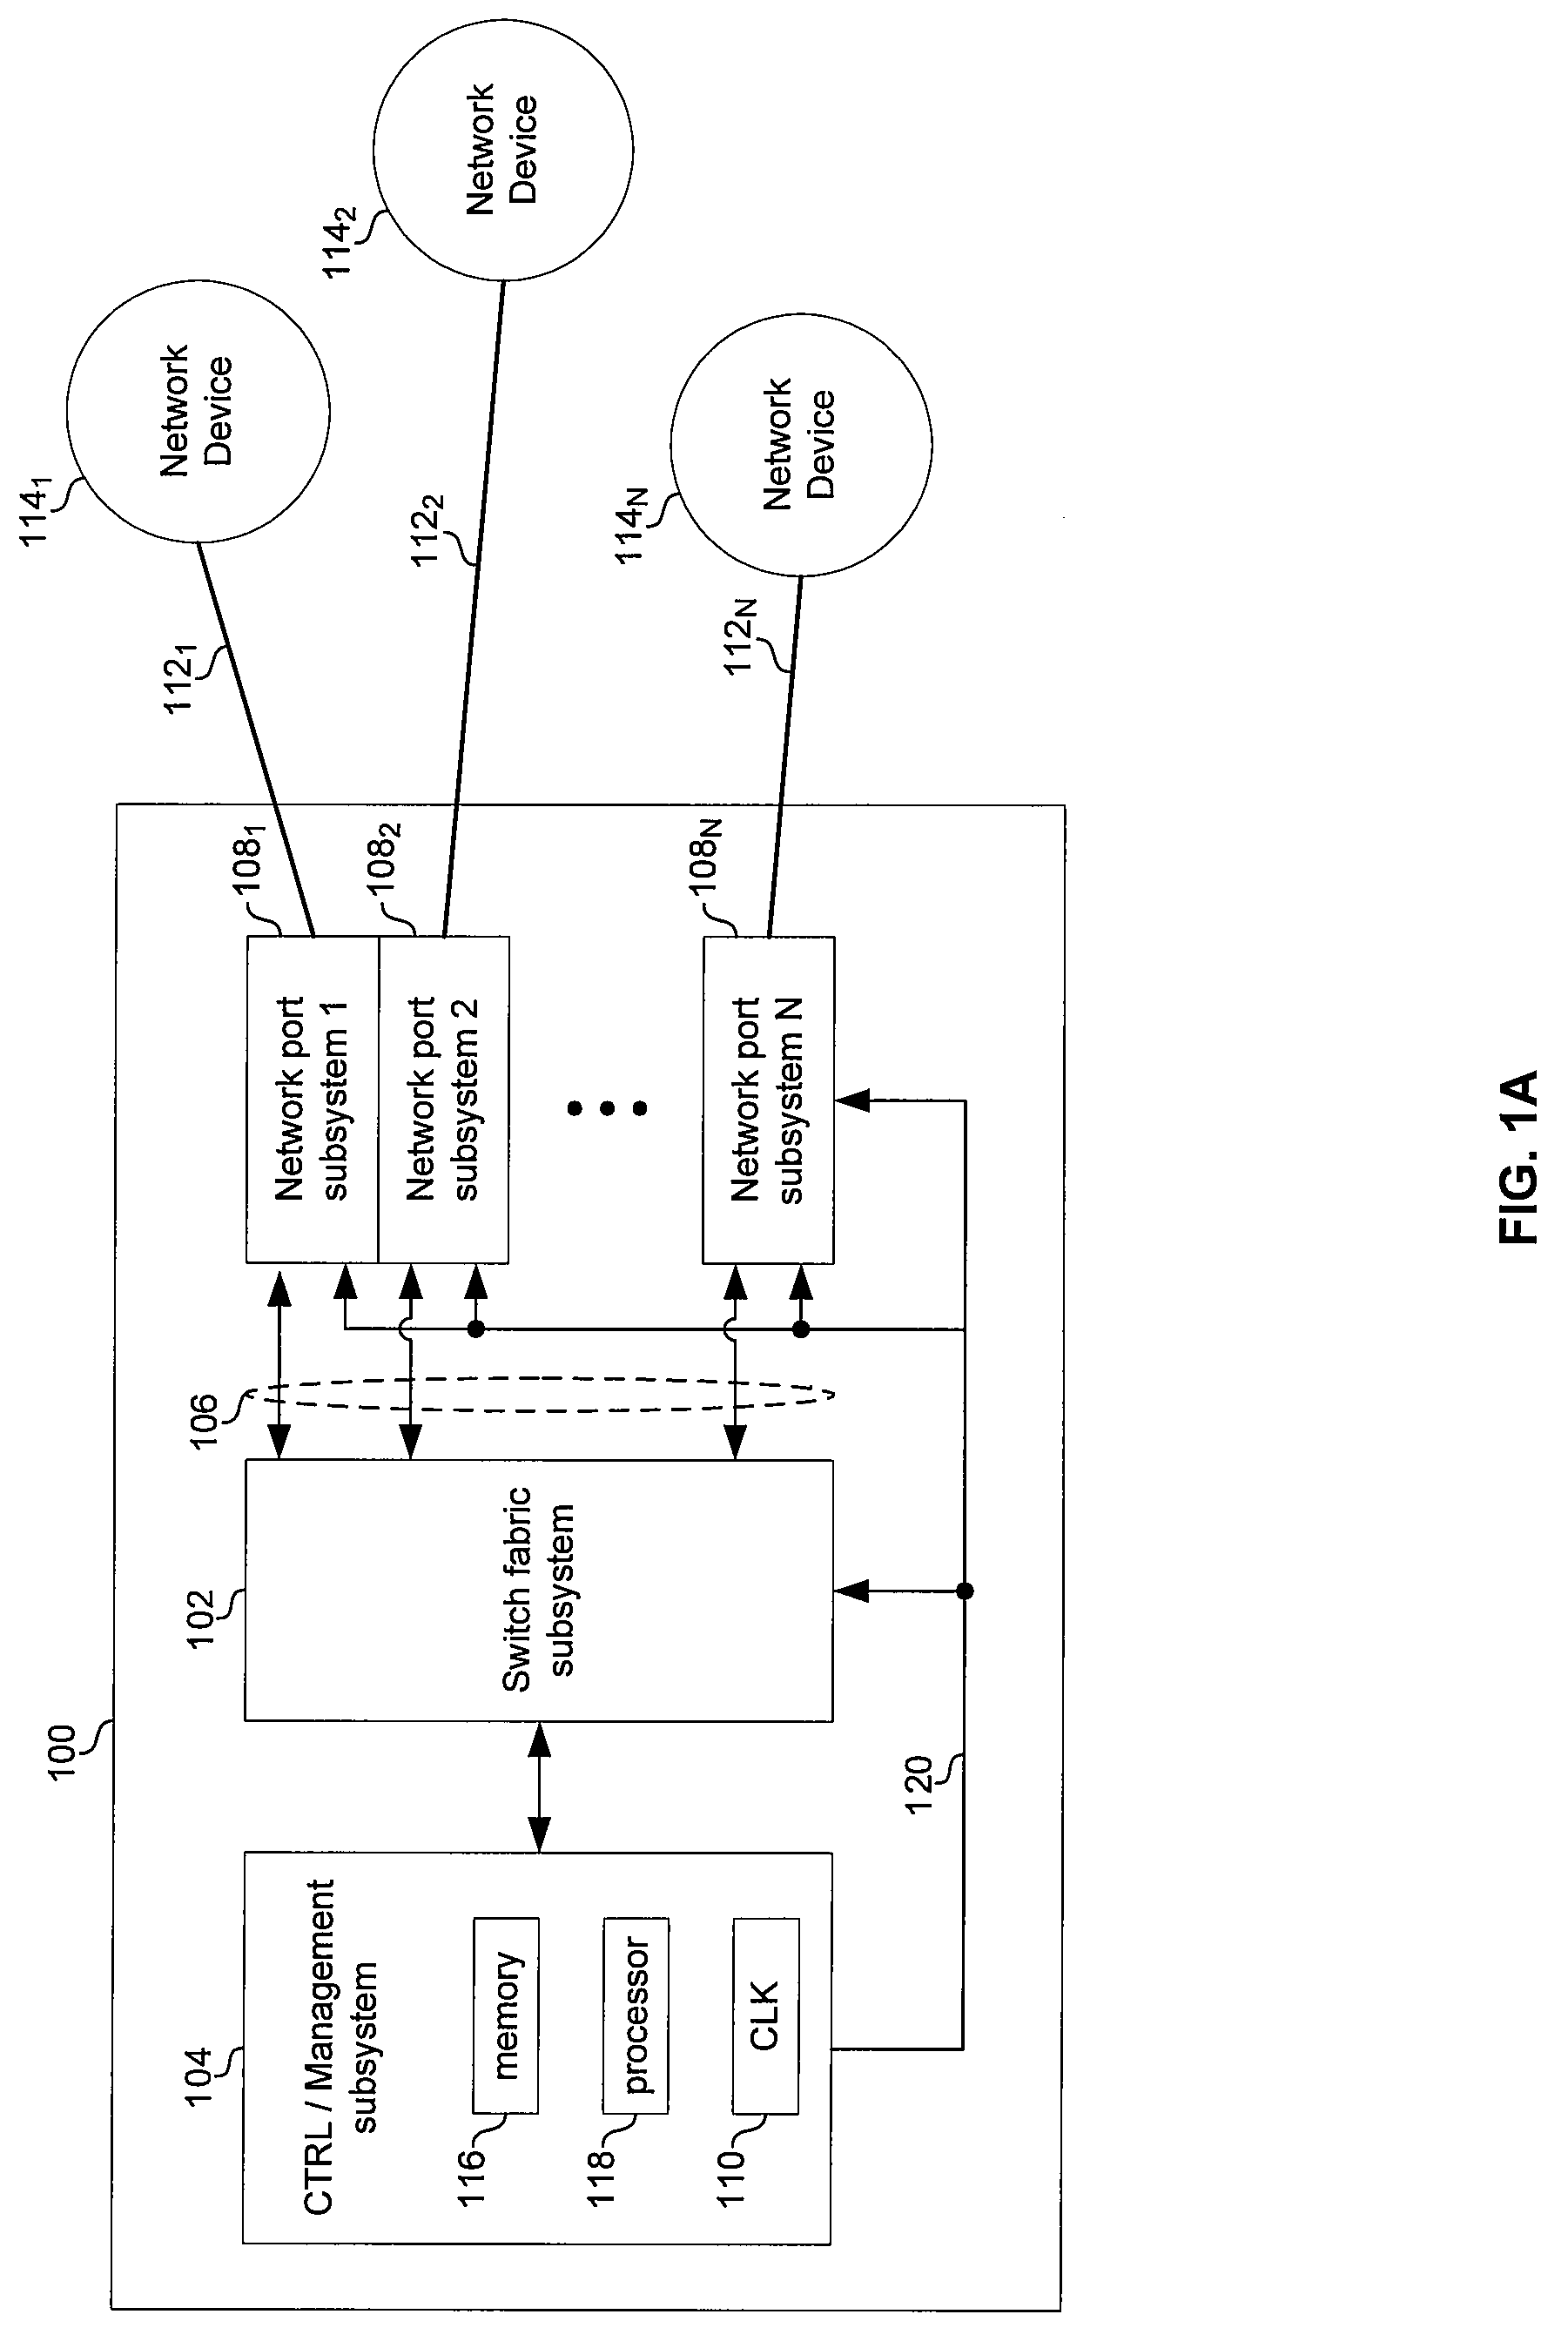 Method and system for duty cycling portions of a network device based on aggregate throughput of the device